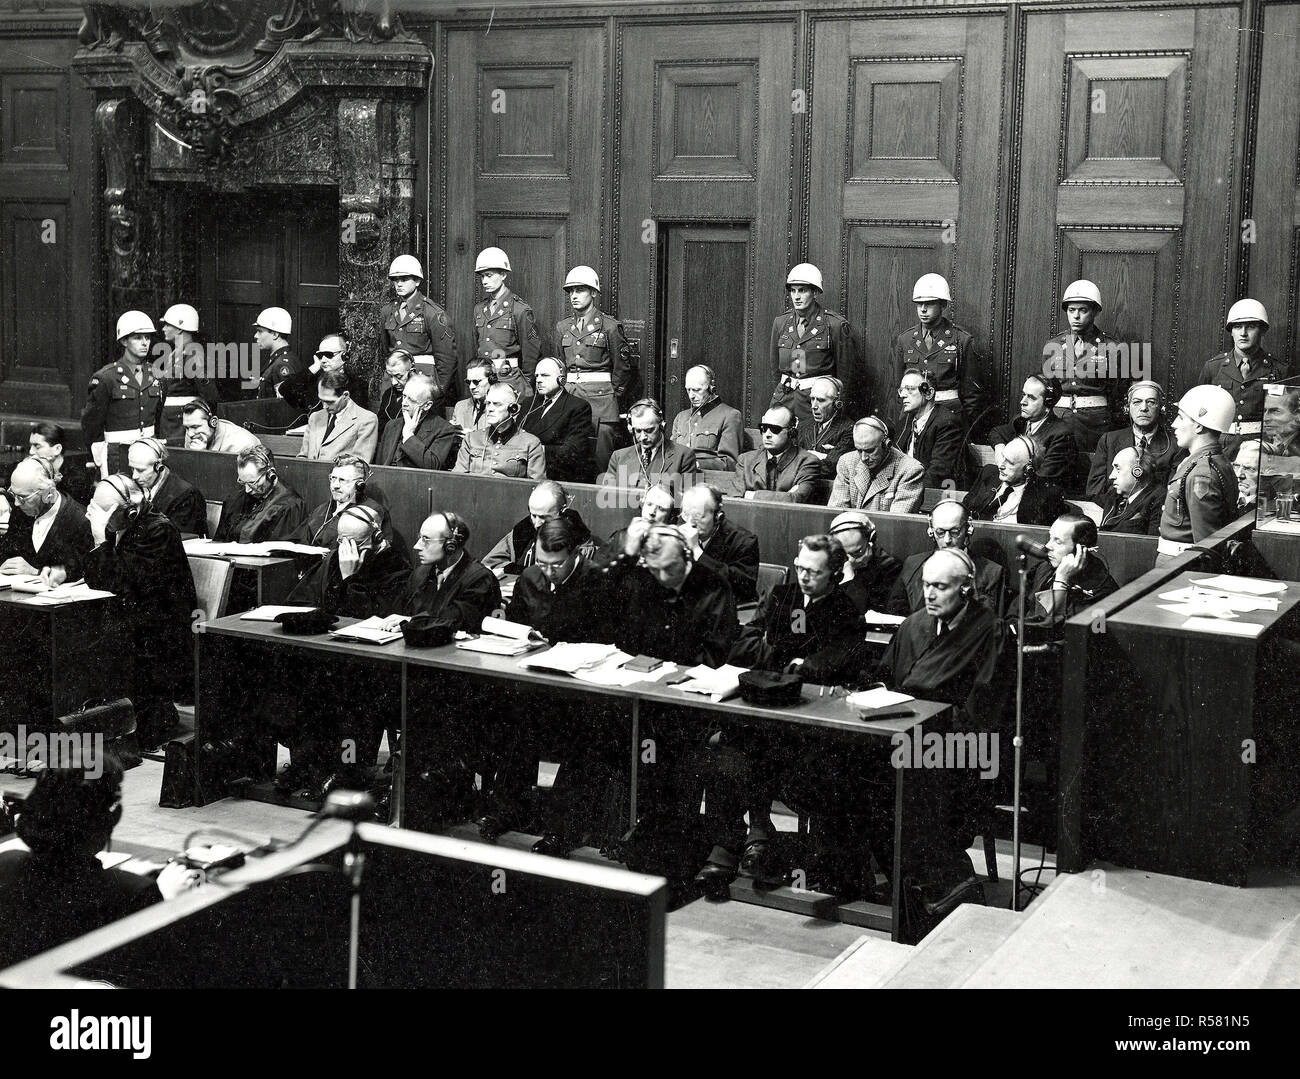 The prosecution charges the defendants with conspiring to destroy the independence of other nations. Goering is in the defendant's box. The defendants, surrounded by American military police, Goering, Hess, Von Ribbentrop, Keiter, Rosenberg, Frank, Frick, Streicher, Funk, Schacht; back row, Donitz, Raeder, Von Schirach, Sauckel, Jodl, Von Papen, Seyss-Inquart, Speer, Von Neurath, and Hans Fritsche. 11/23/45. Stock Photo